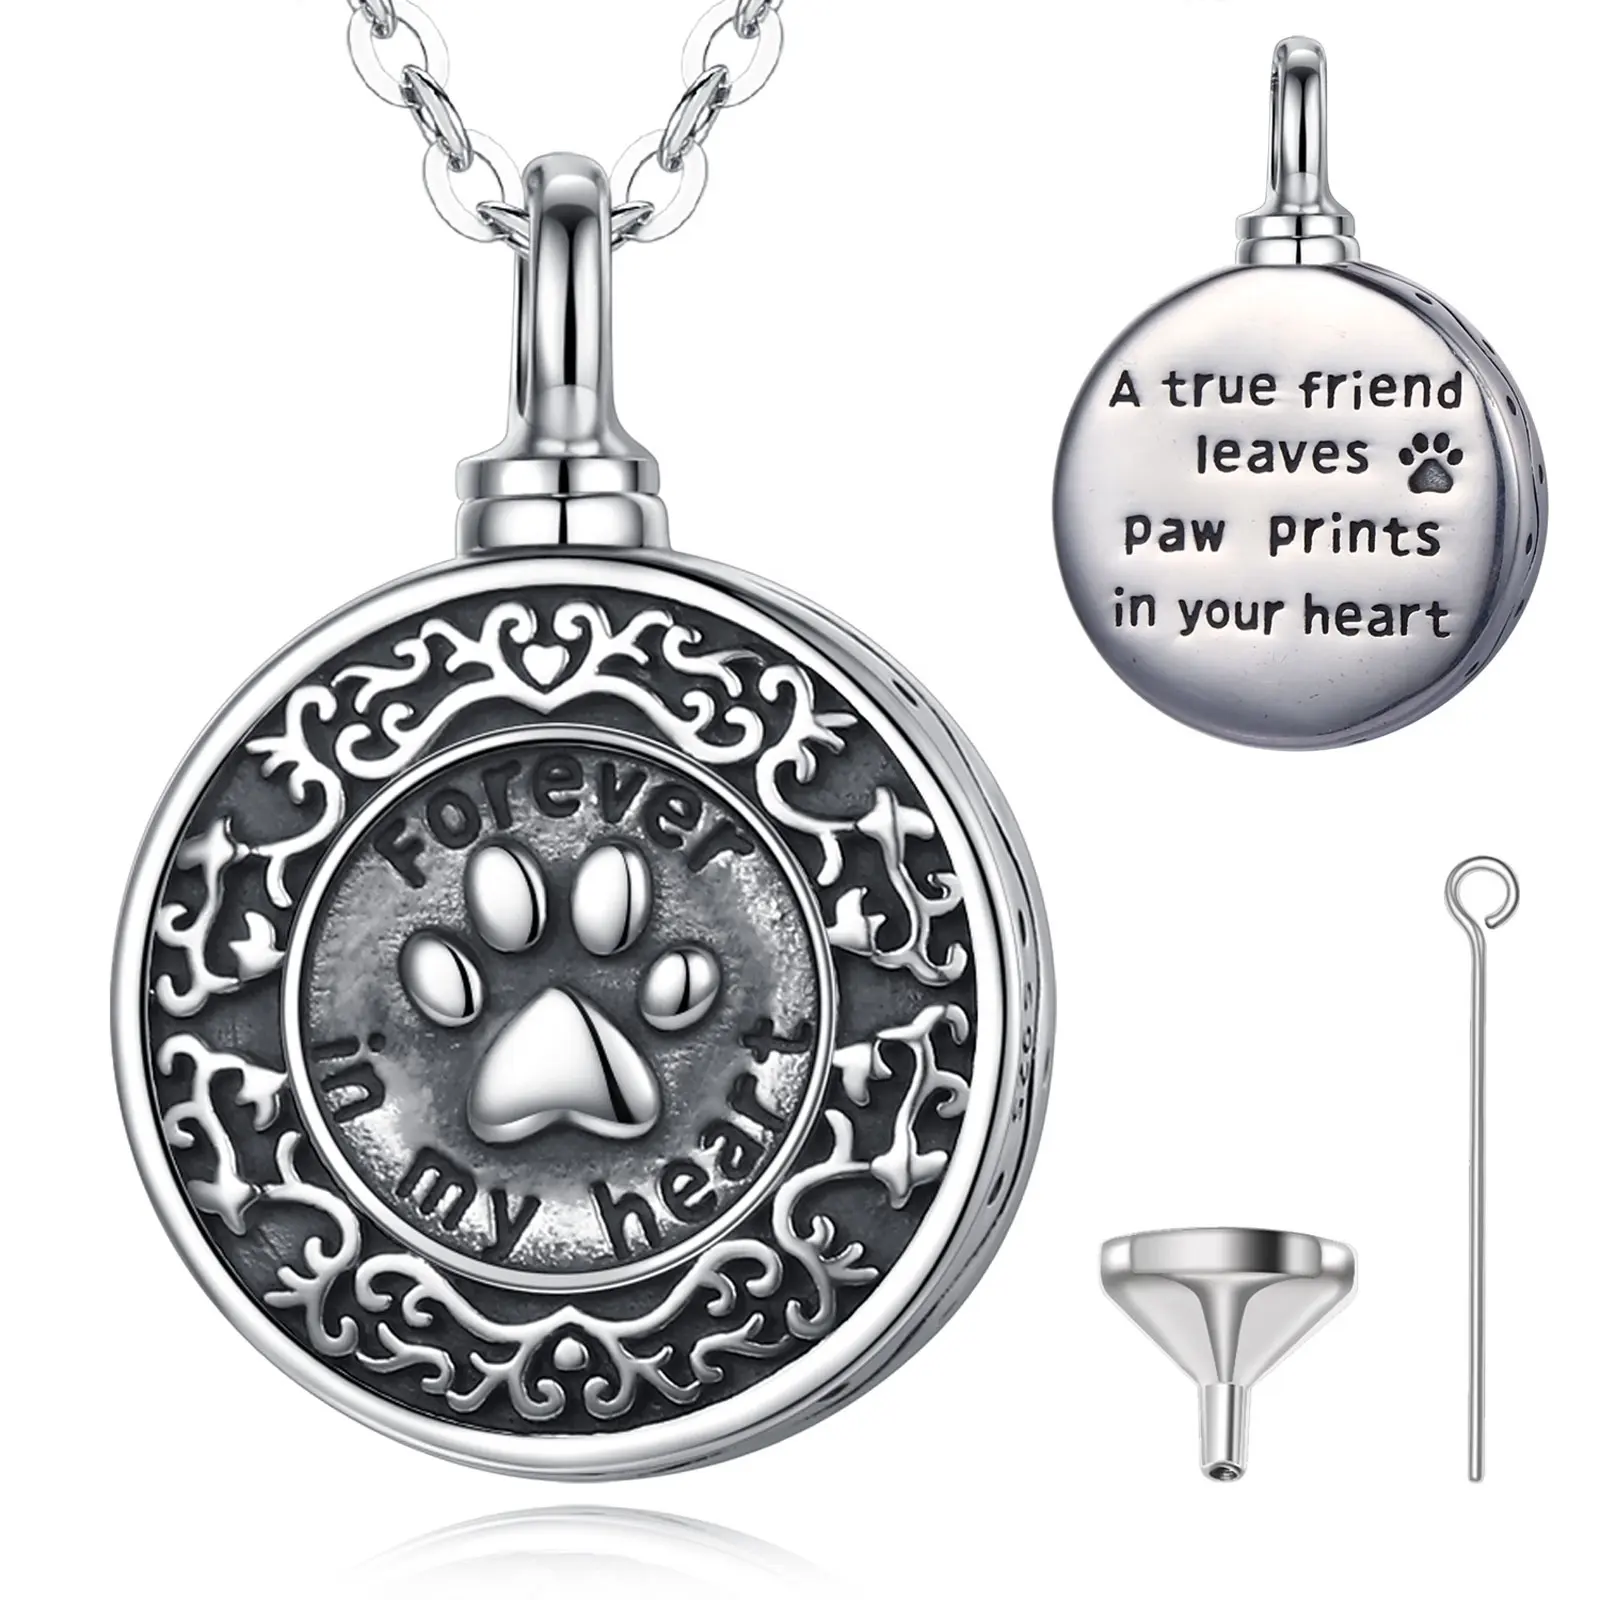 Animal paw s925 sterling silver pet memorial cremation jewelry pendant necklace